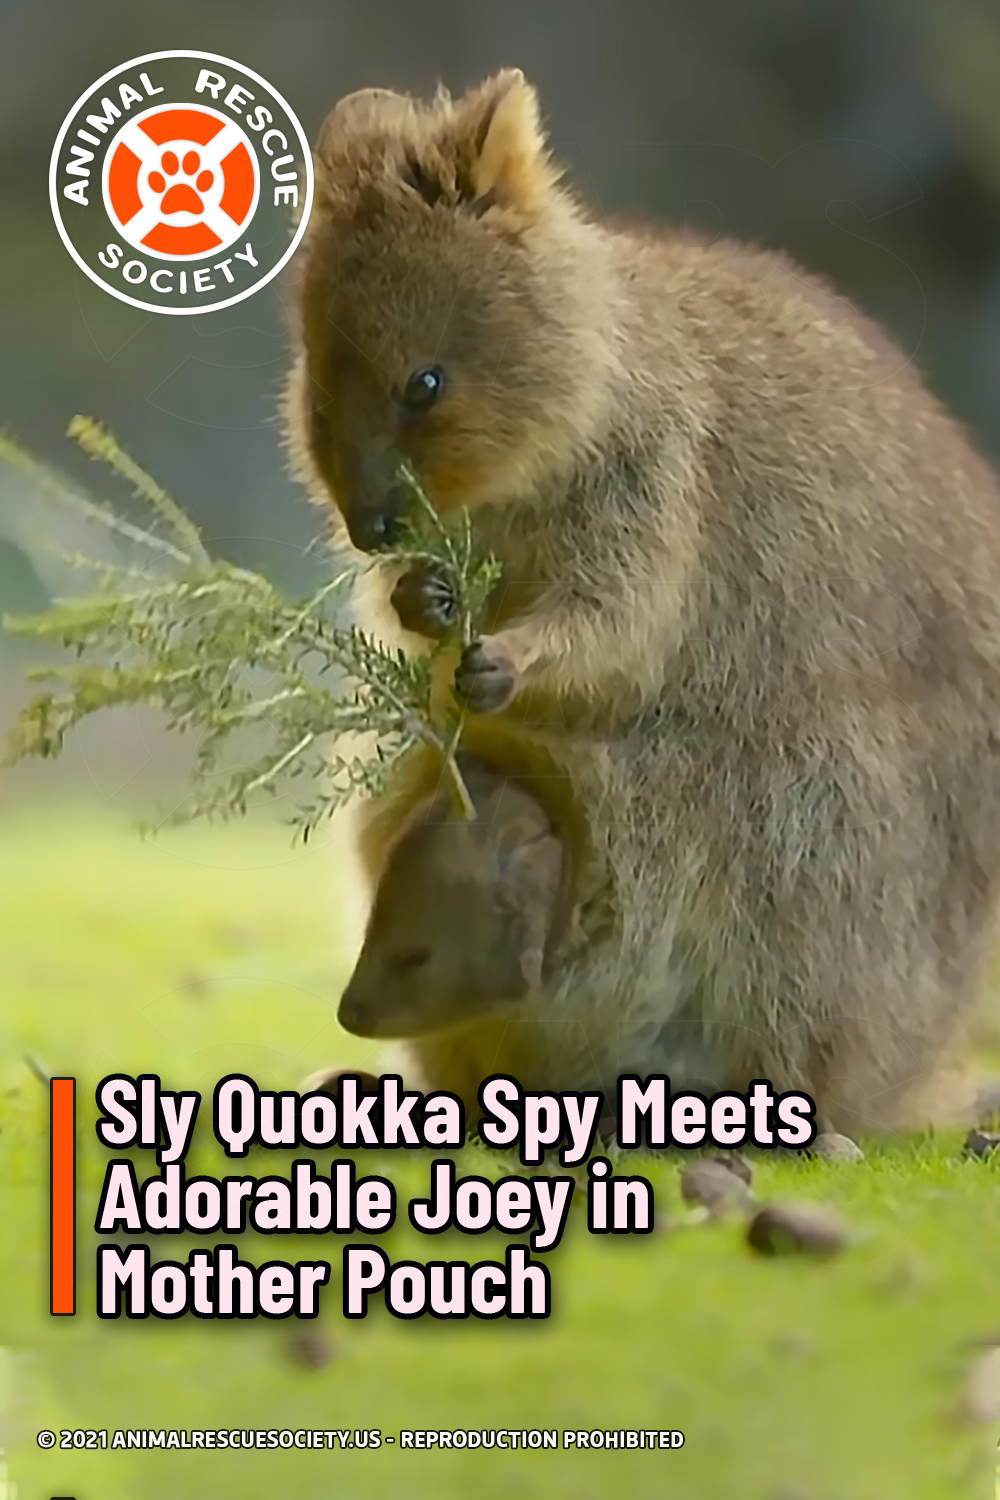 Sly Quokka Spy Meets Adorable Joey in Mother Pouch